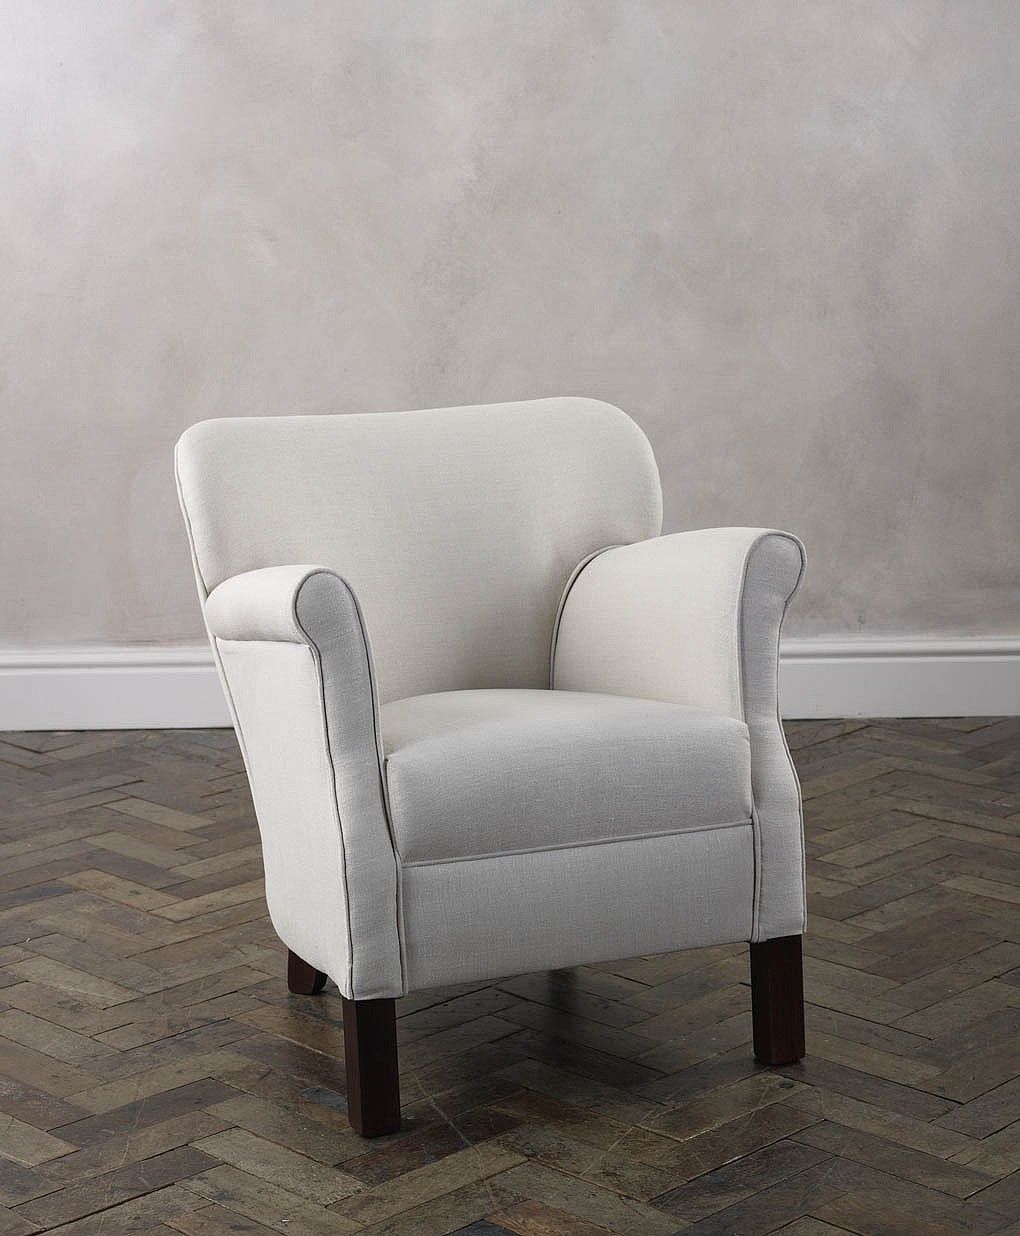 Tarka Occasional Chair Chairs Pinterest Armchairs Chairs With Regard To Small Arm Chairs (View 2 of 15)